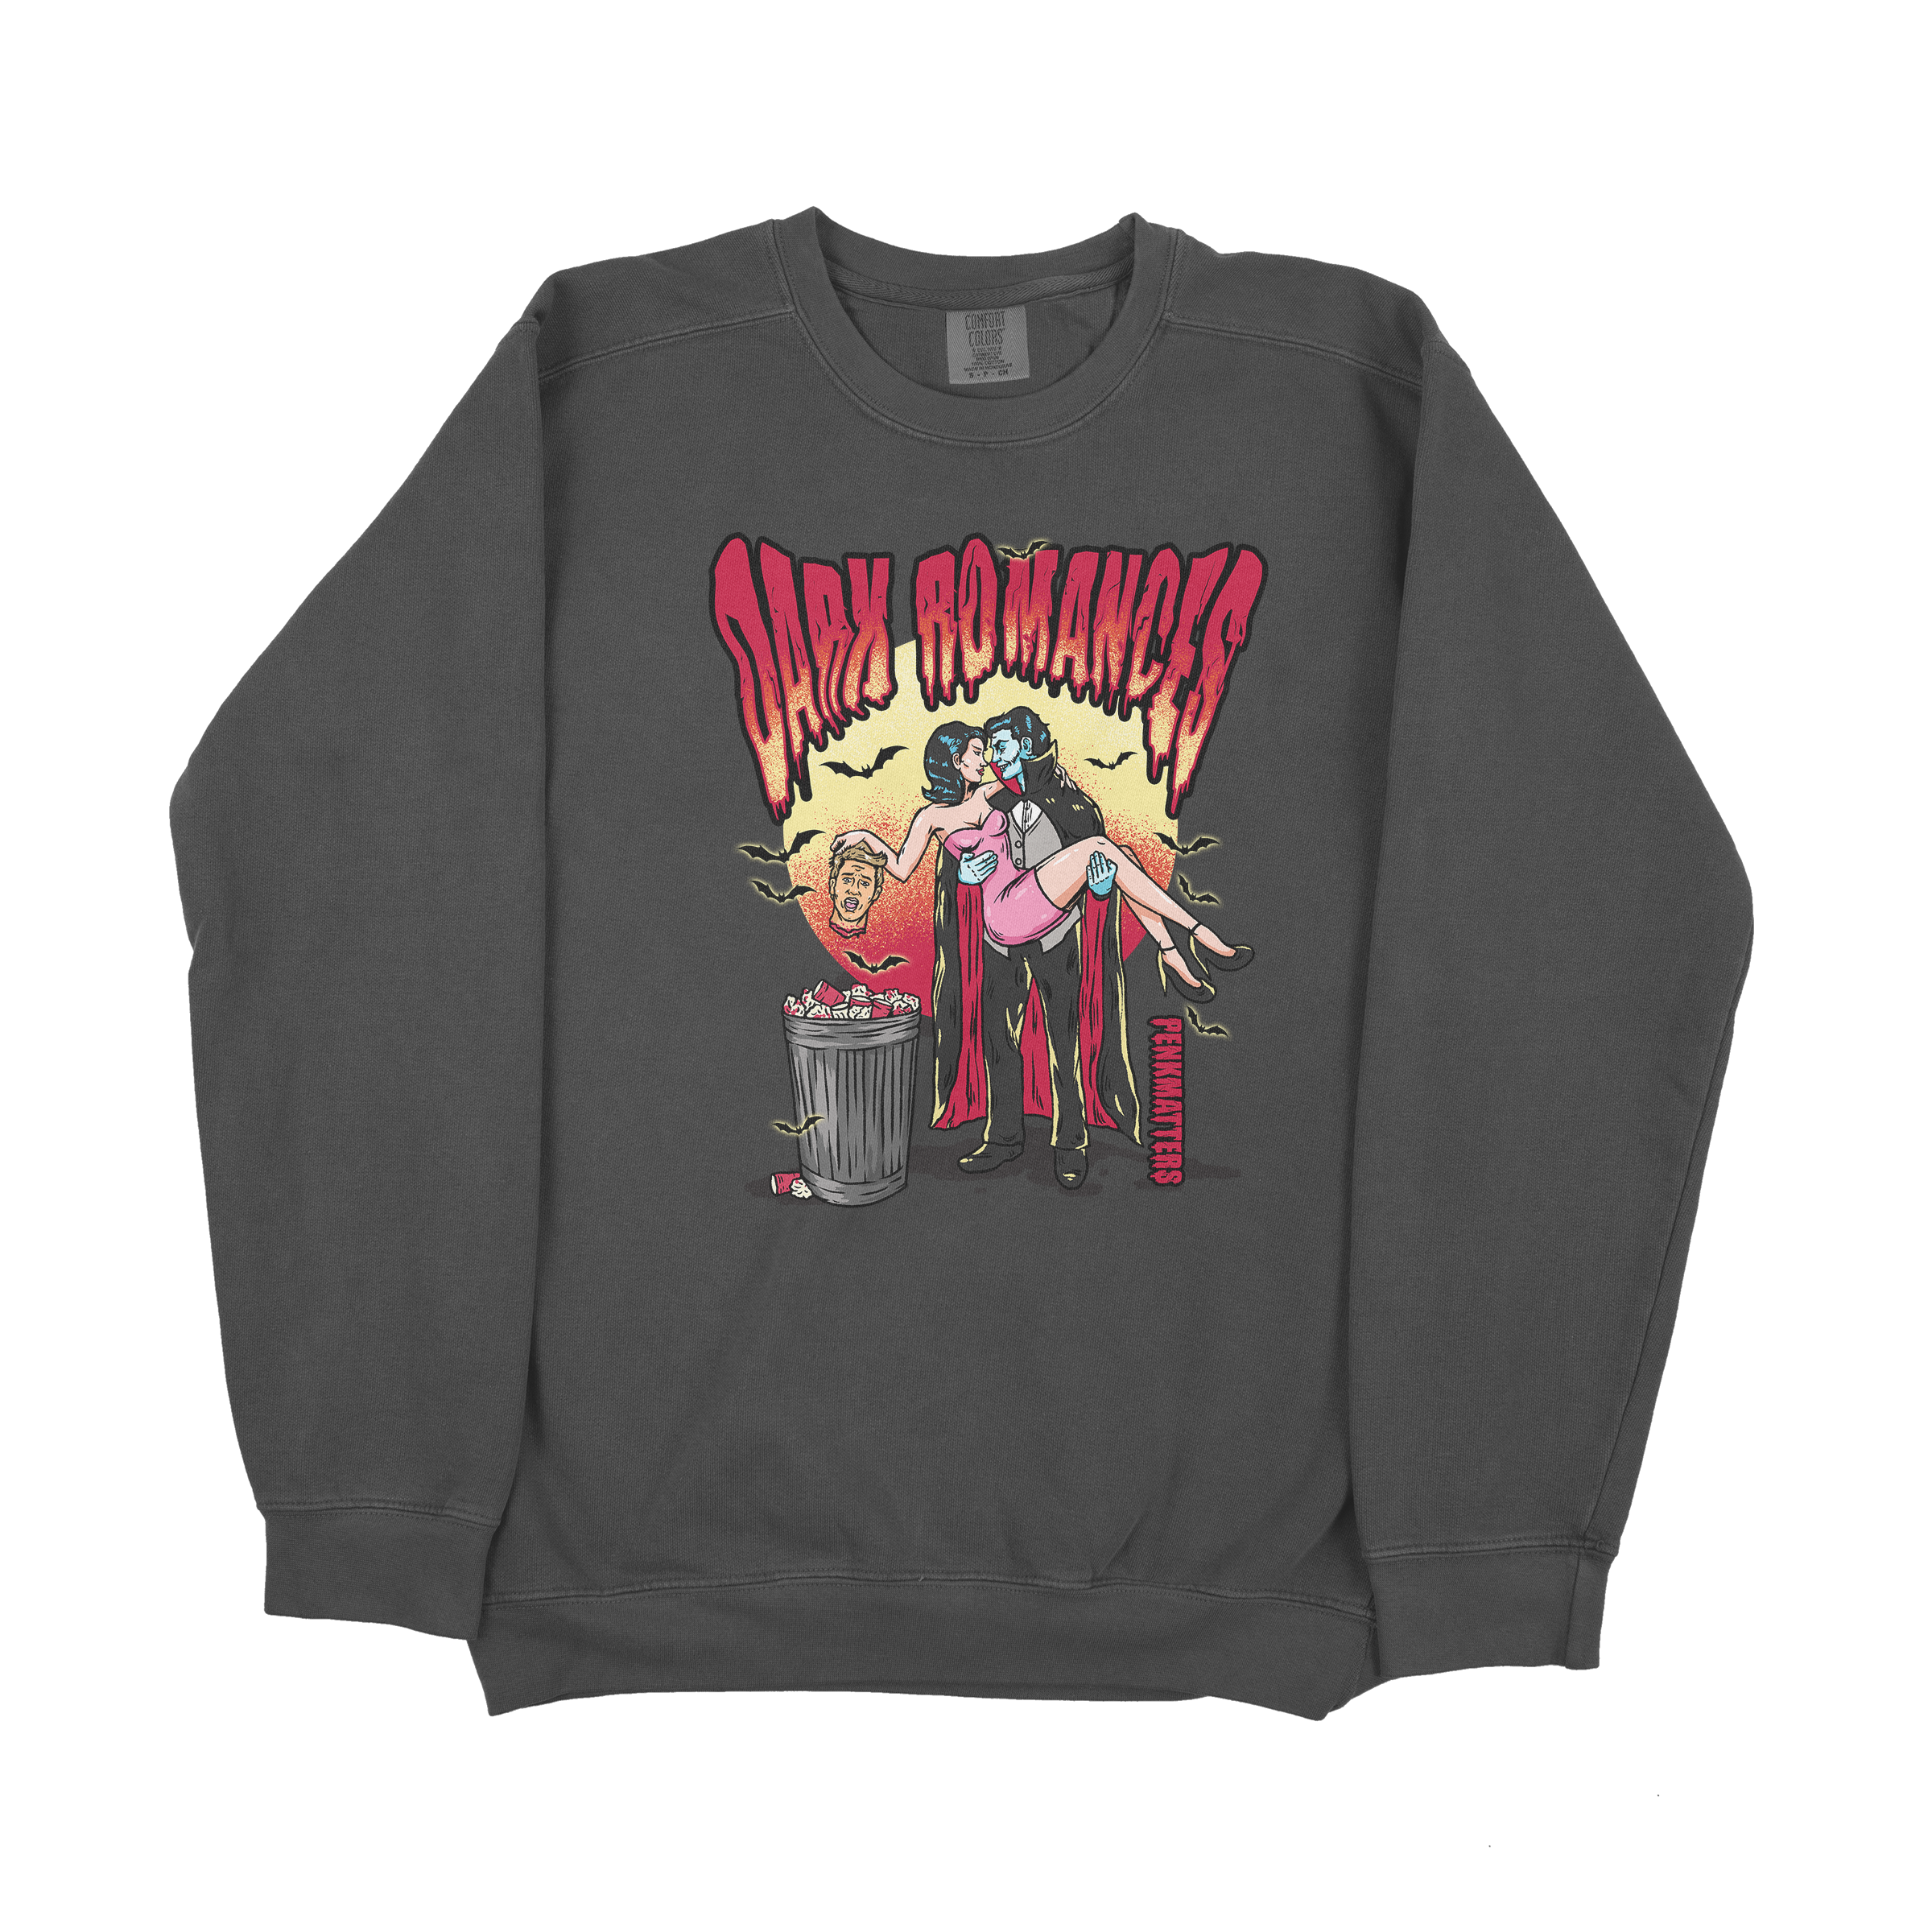 Shop our extensive collection of graphic sweatshirts.